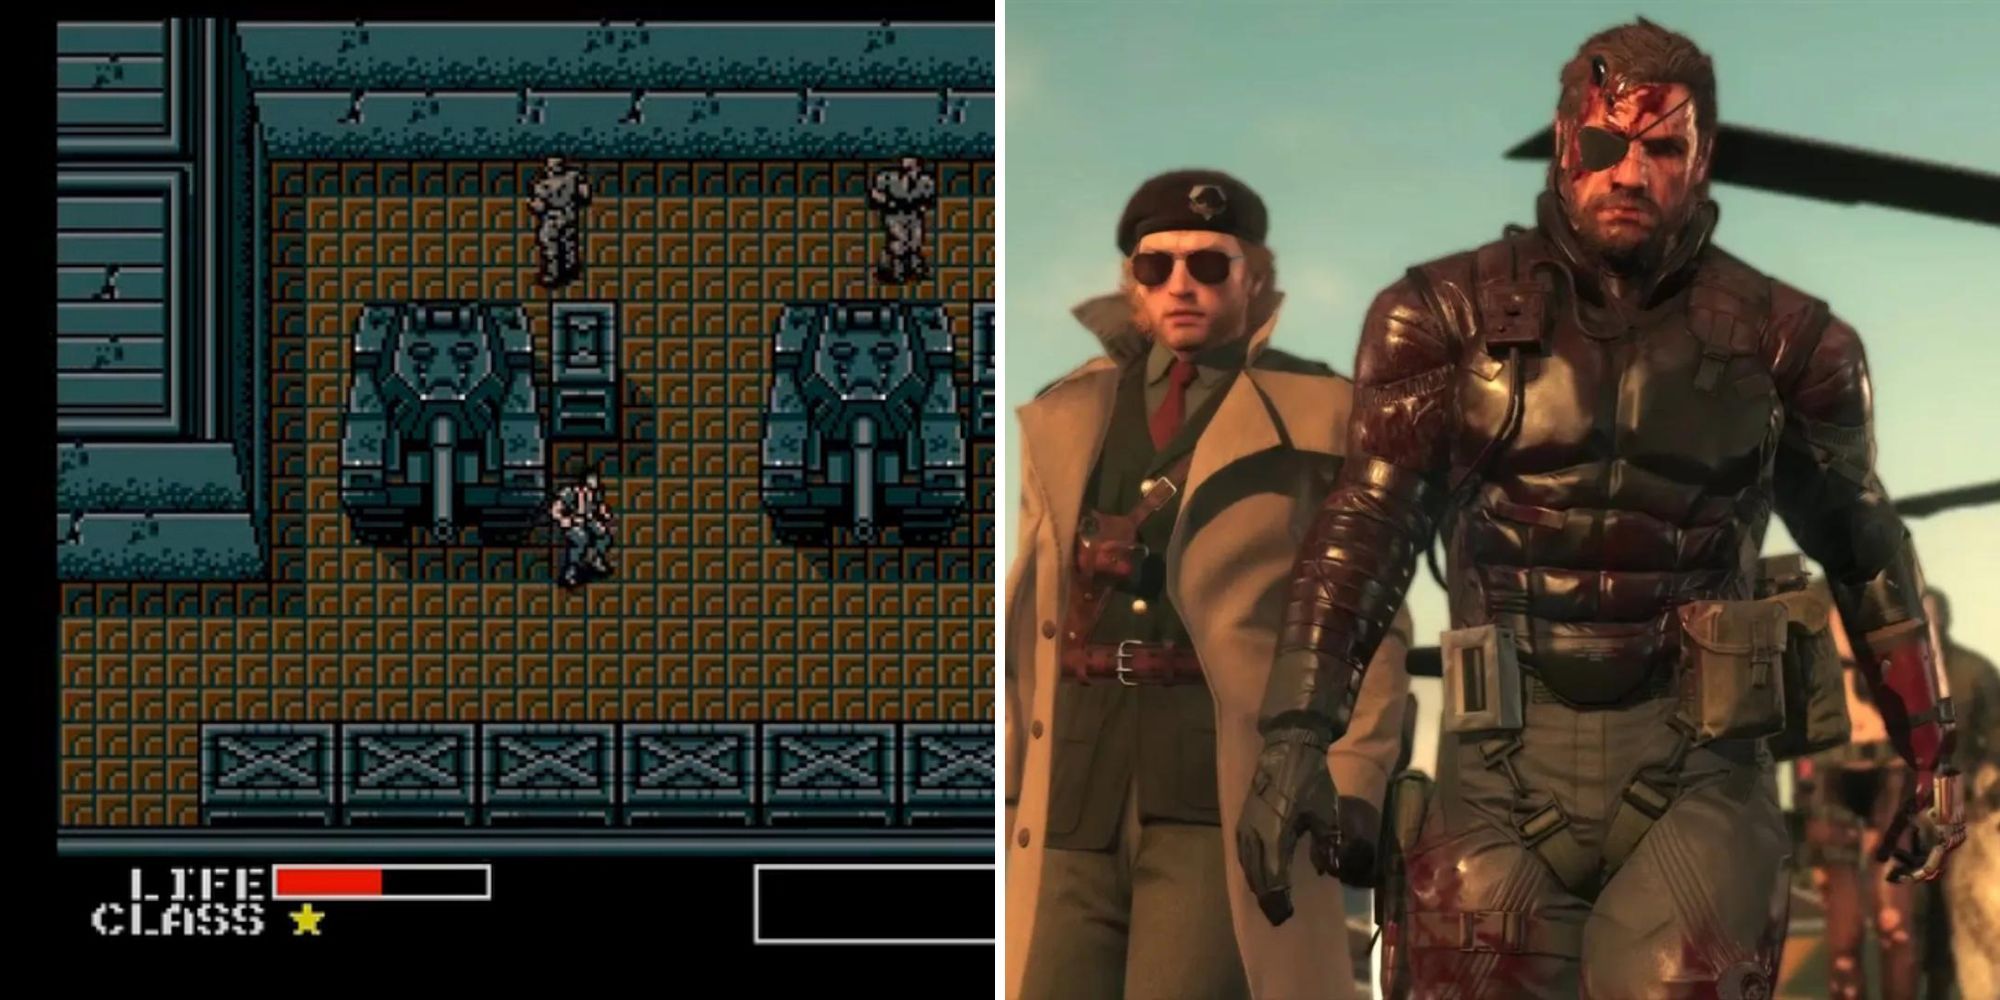 First image shows the original Metal Gear stealth while the second image shows Solid Snake in Metal Gear Solid walking towards the camera